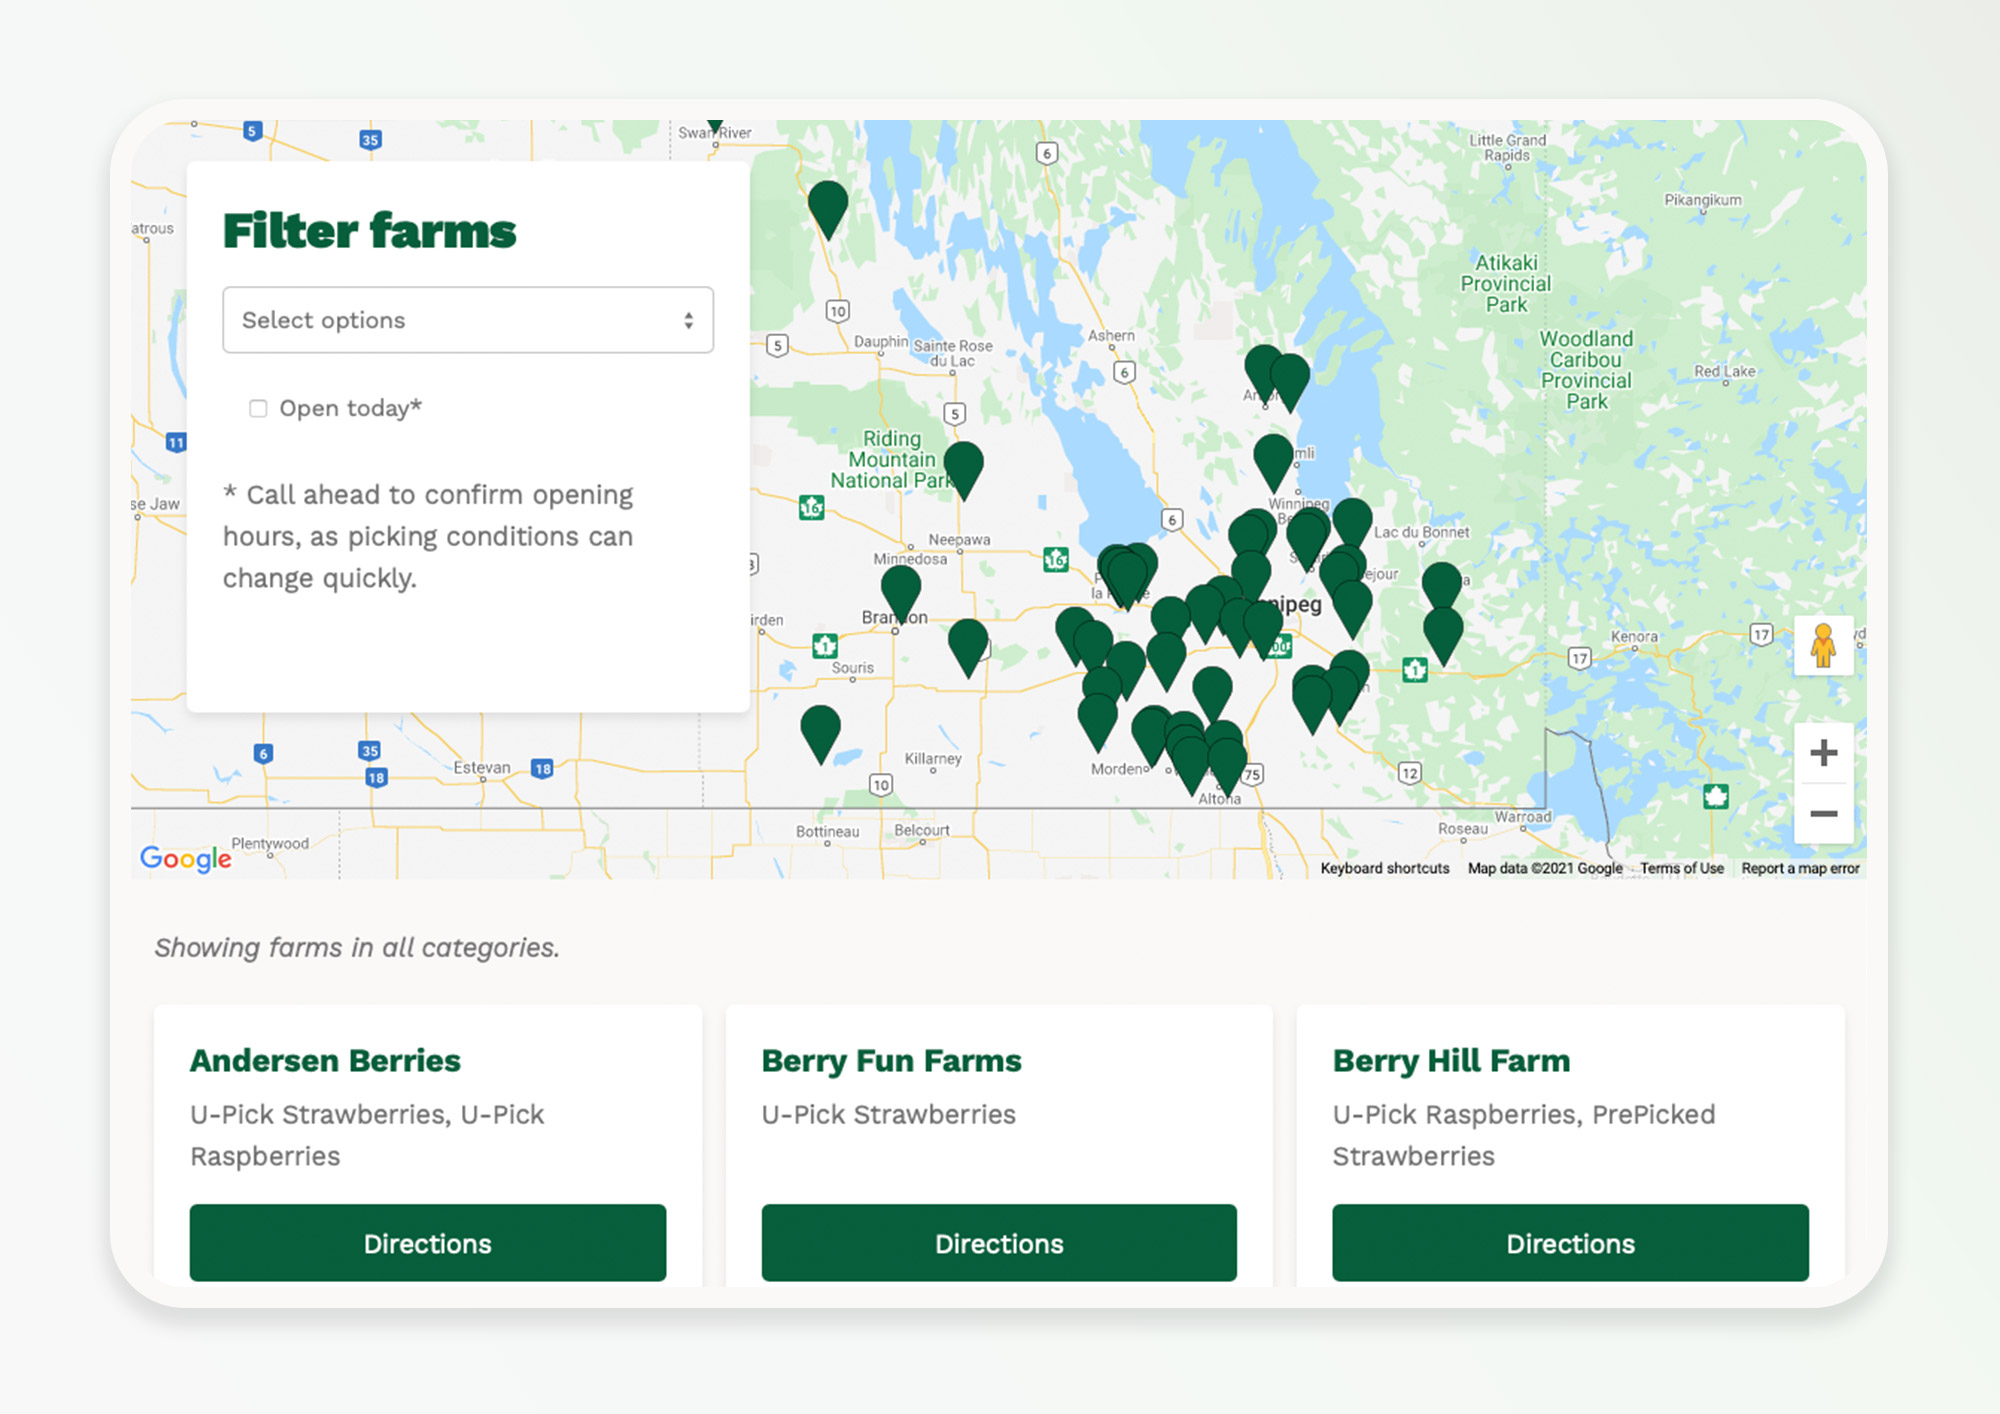 The farm directory and map viewed on desktop.